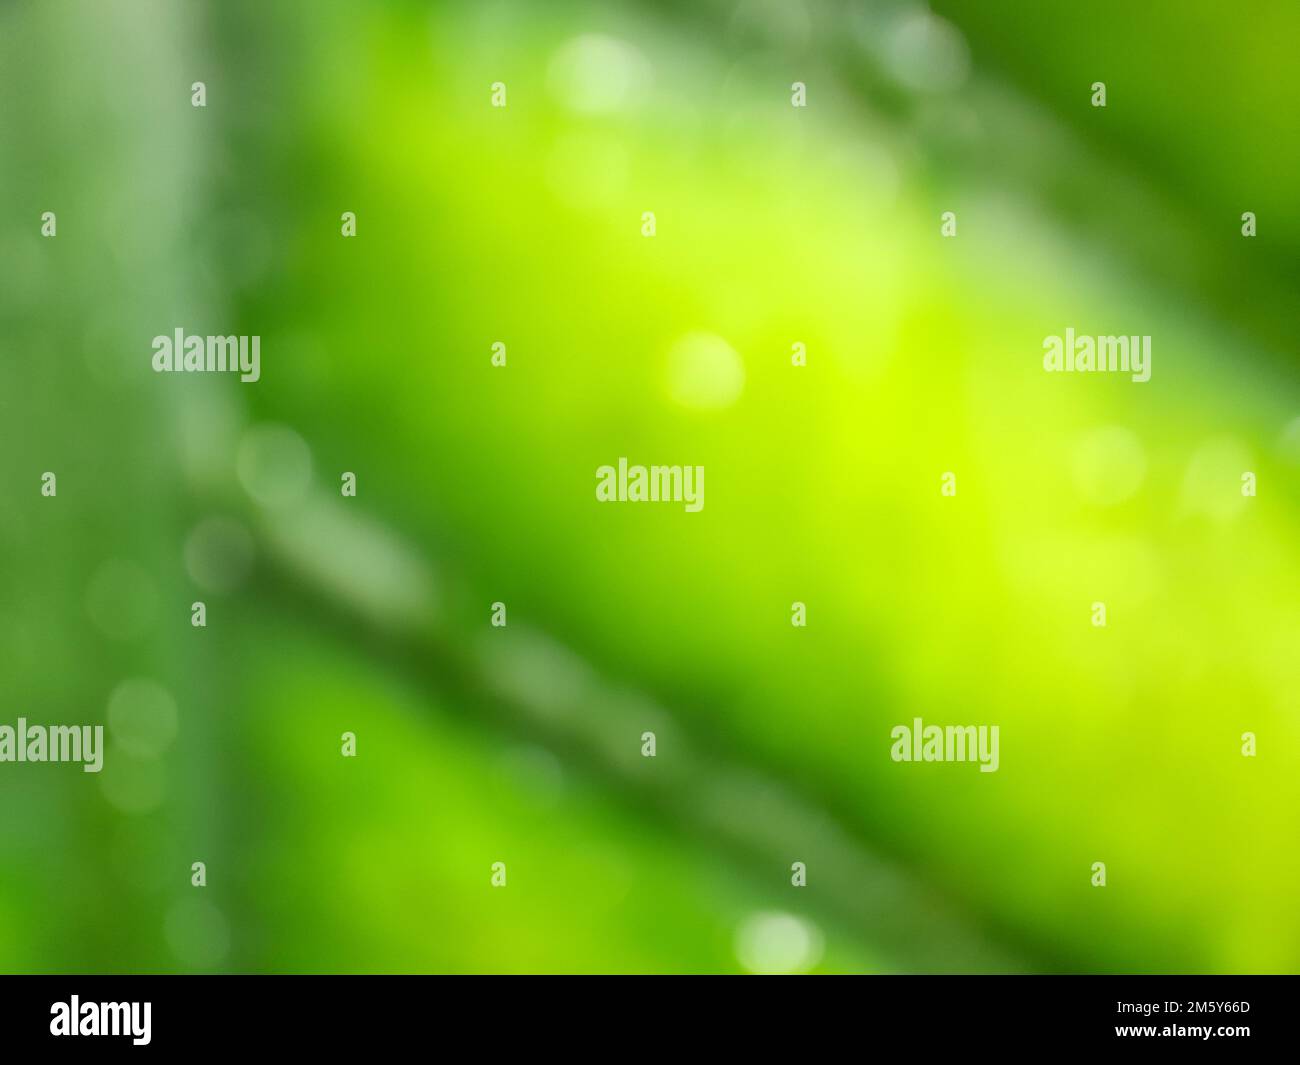 Defocused or blurred of abstract background of yellow leaves and green veins. For wallpapers or illustration Stock Photo